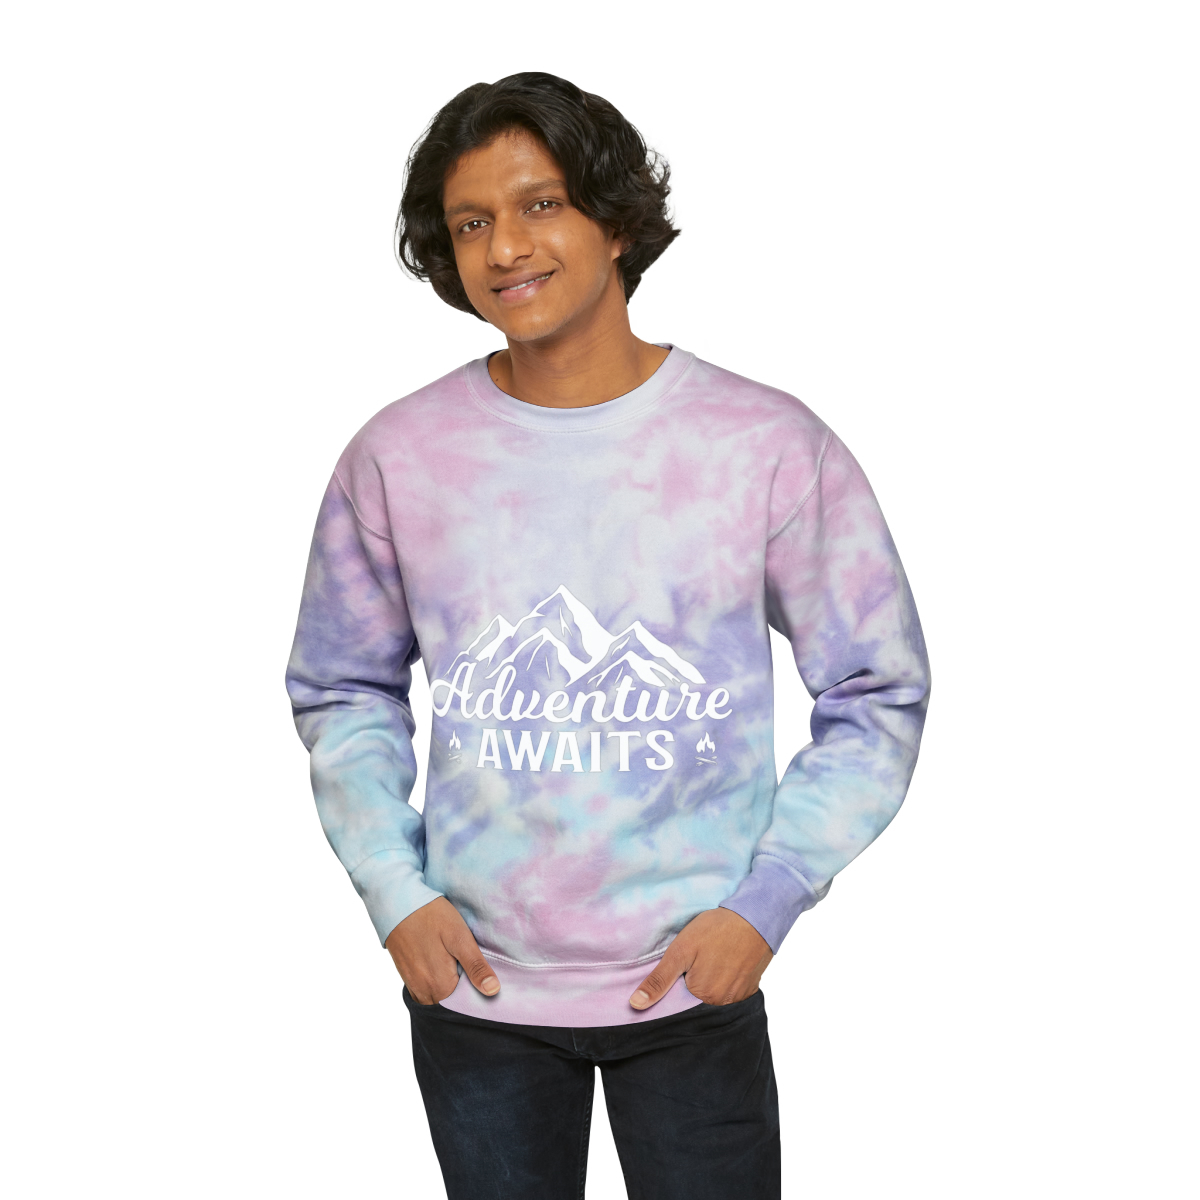 Primary image for Unisex Tie-Dye Sweatshirt "Adventure Awaits": Vibrant, Hand-Dyed Comfort for Out